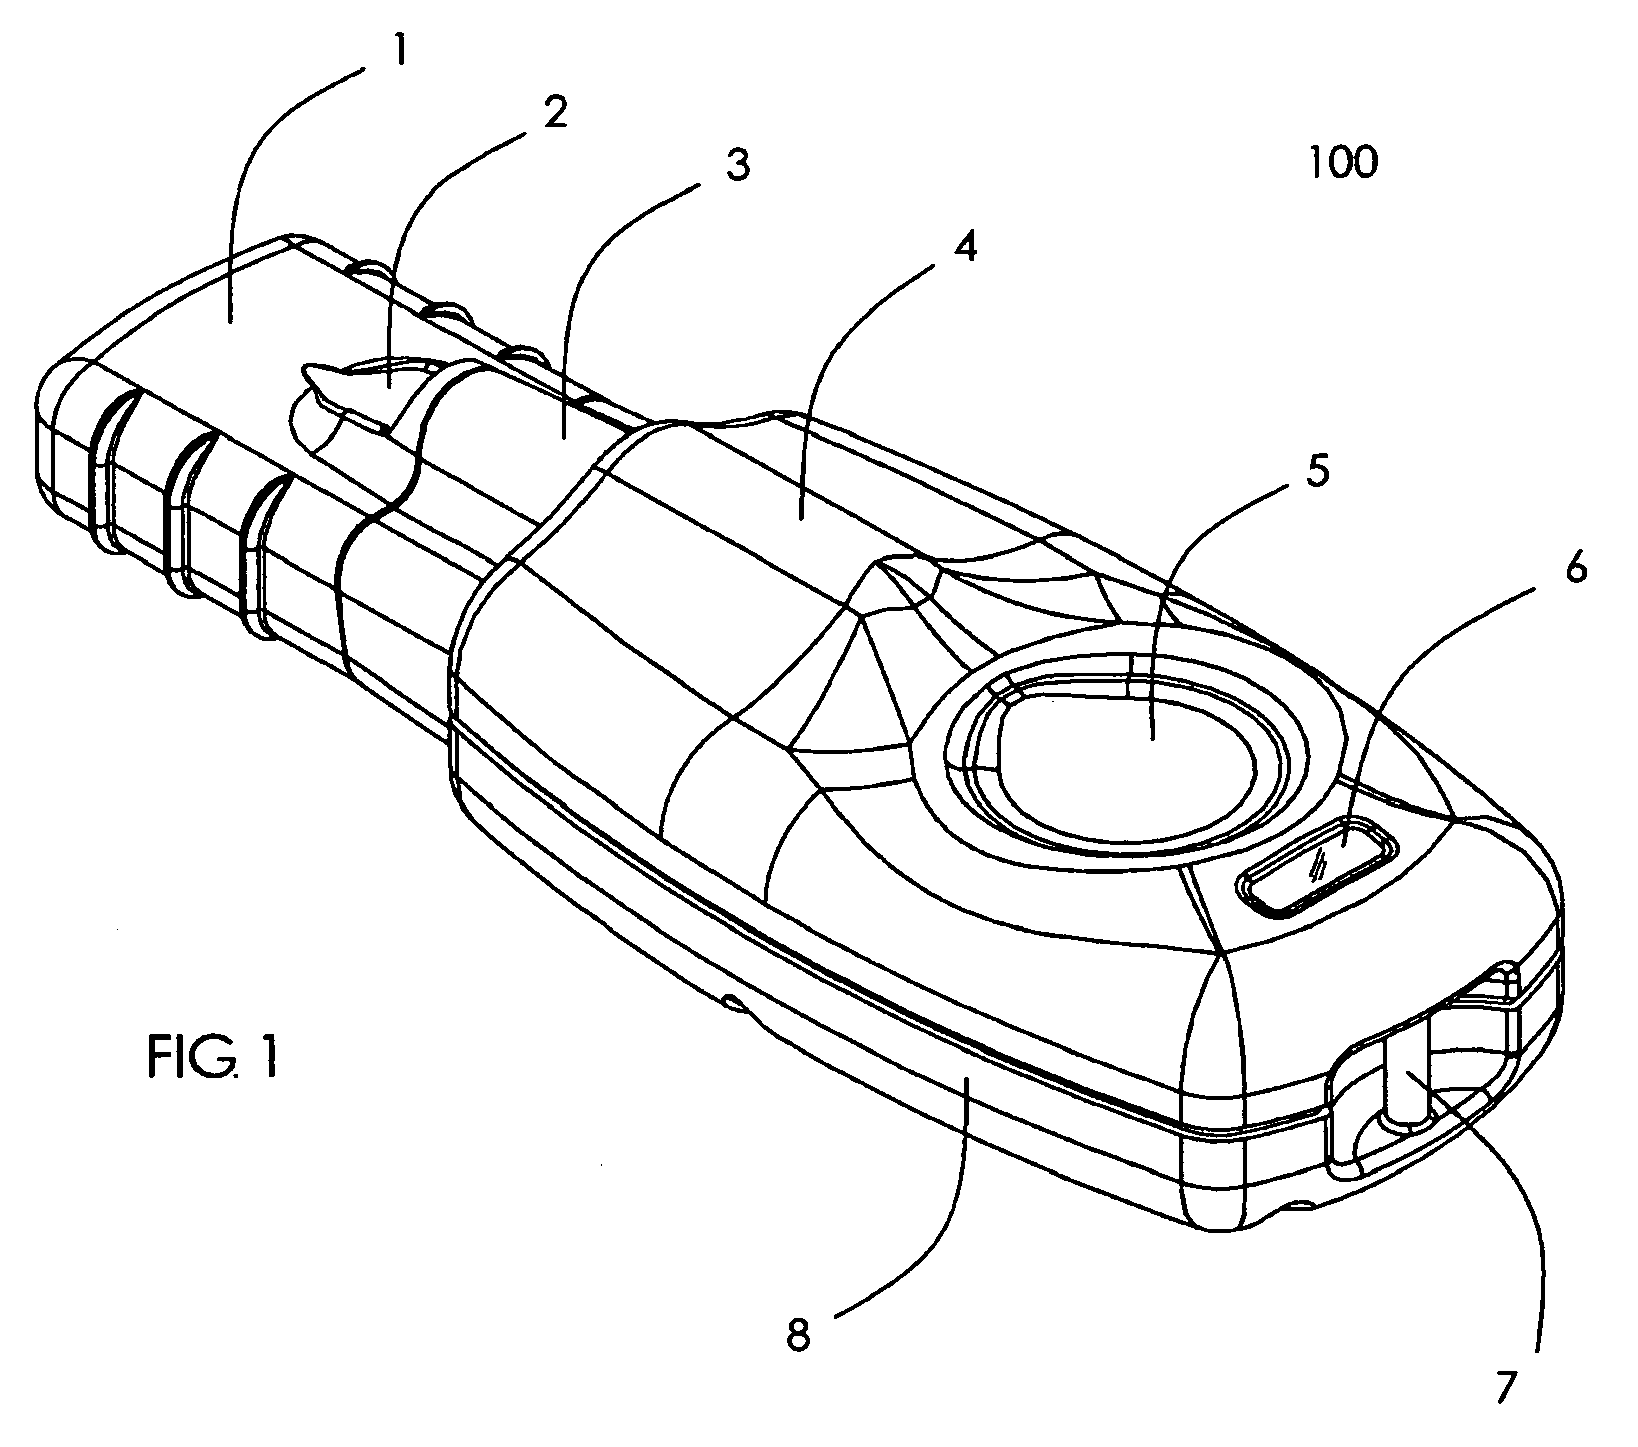 USB memory device with integrated flashlight